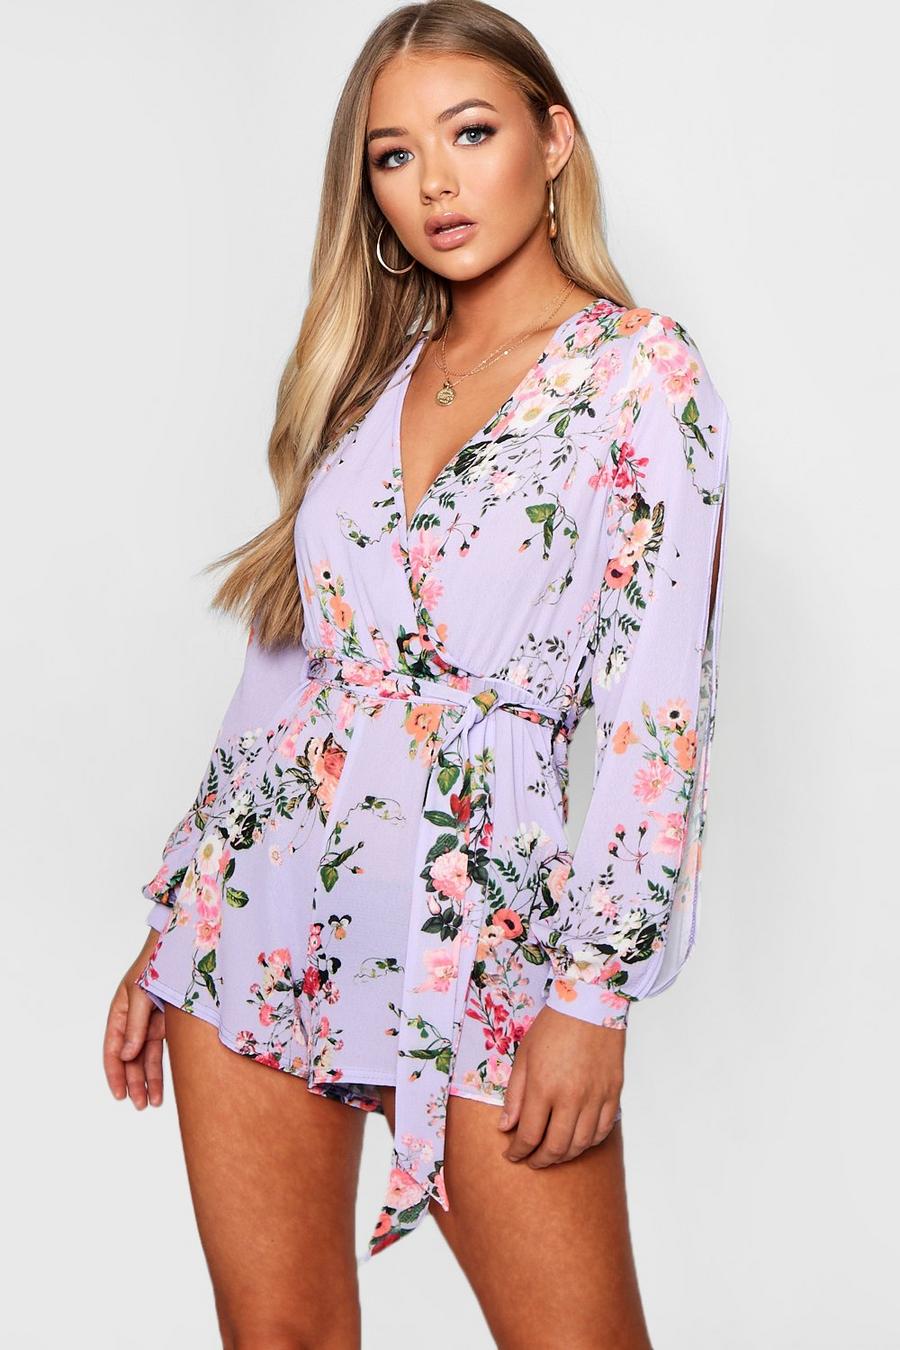 ROCKING ROMPER – HOW TO STYLE A FLORAL ROMPER